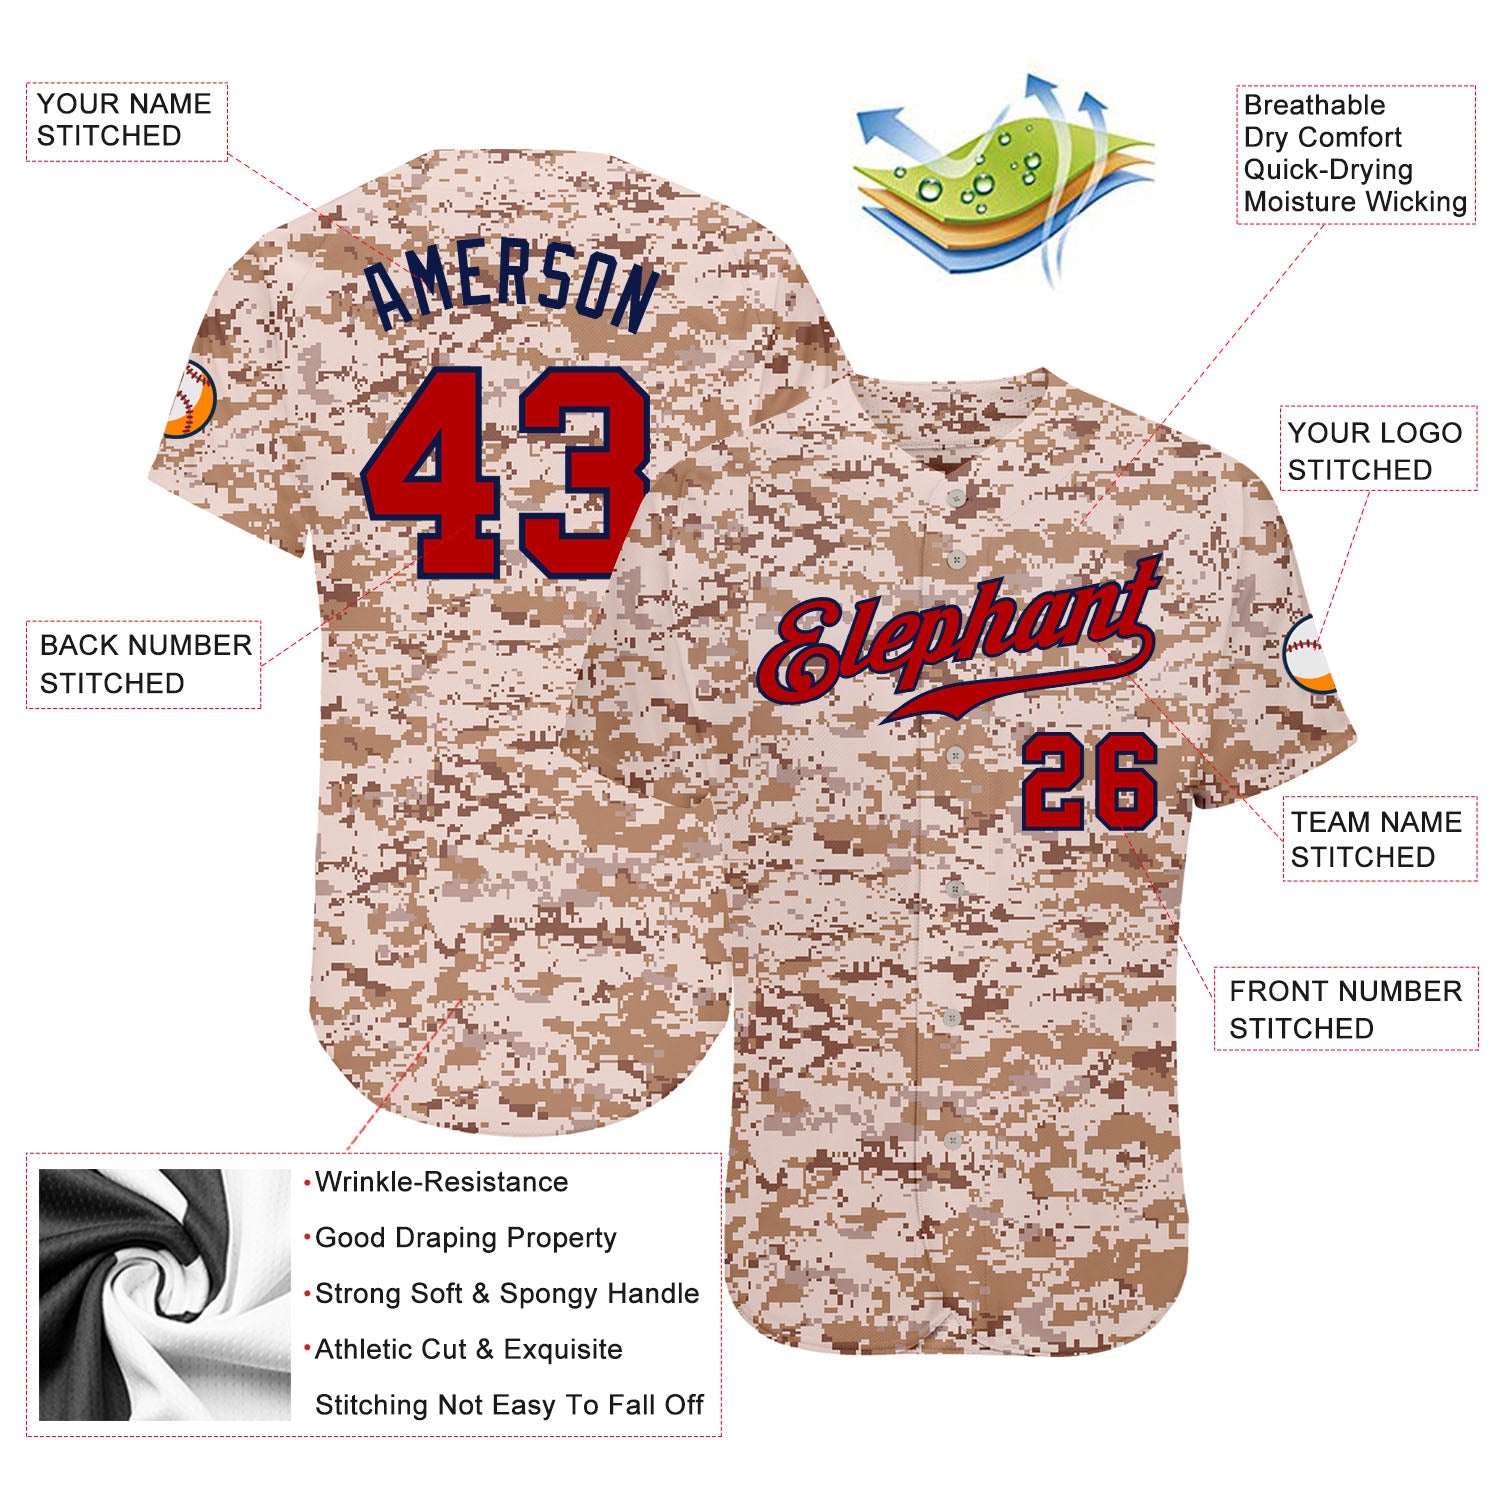 Custom Camo Red-Navy Authentic Baseball Jersey Discount